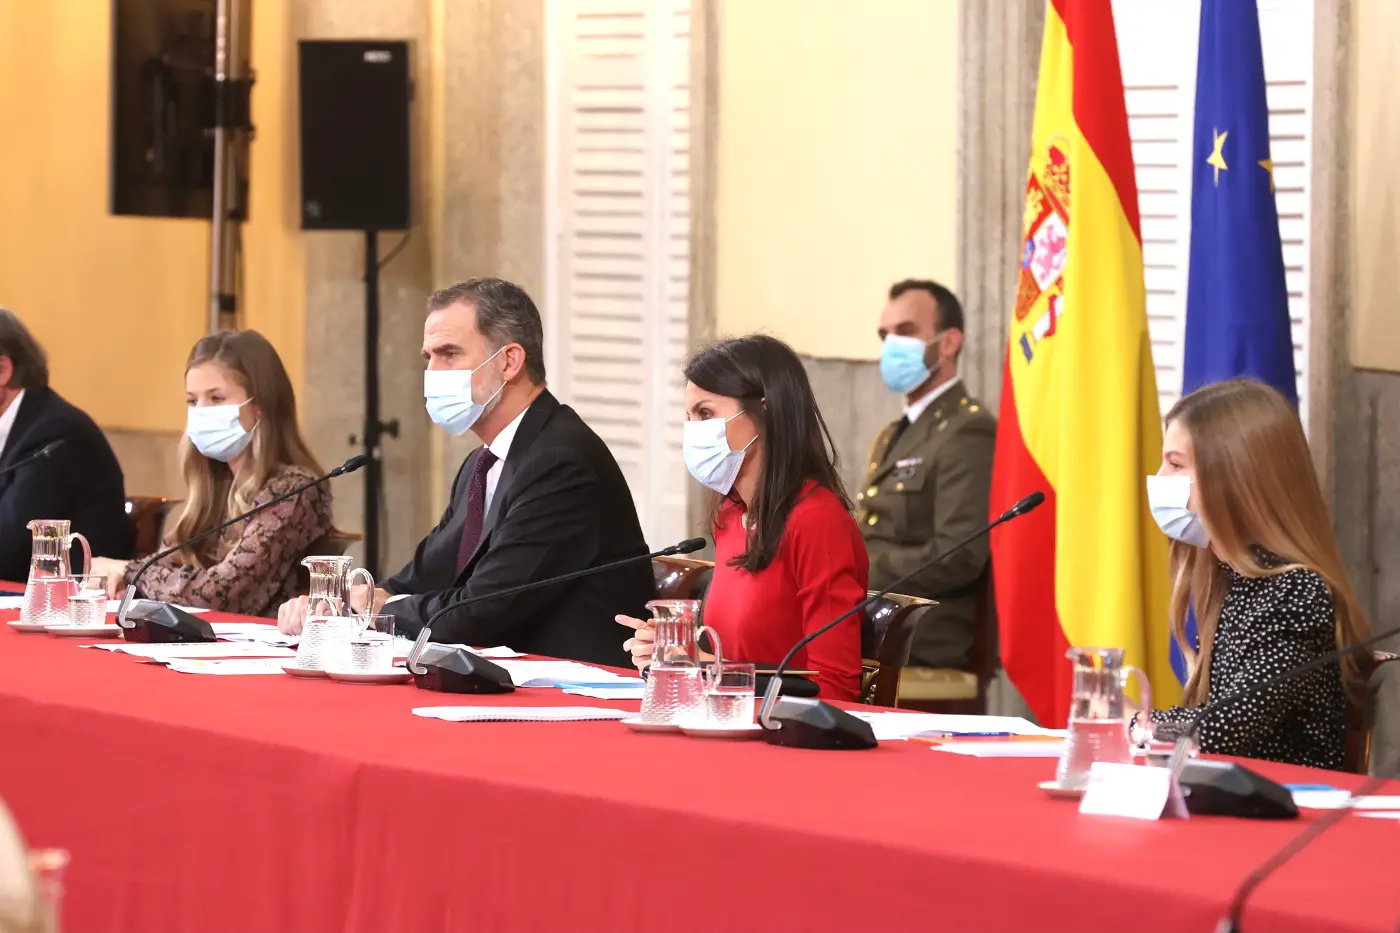 Queen Letizia of Spain at the Princess of Girona Foundation meeting